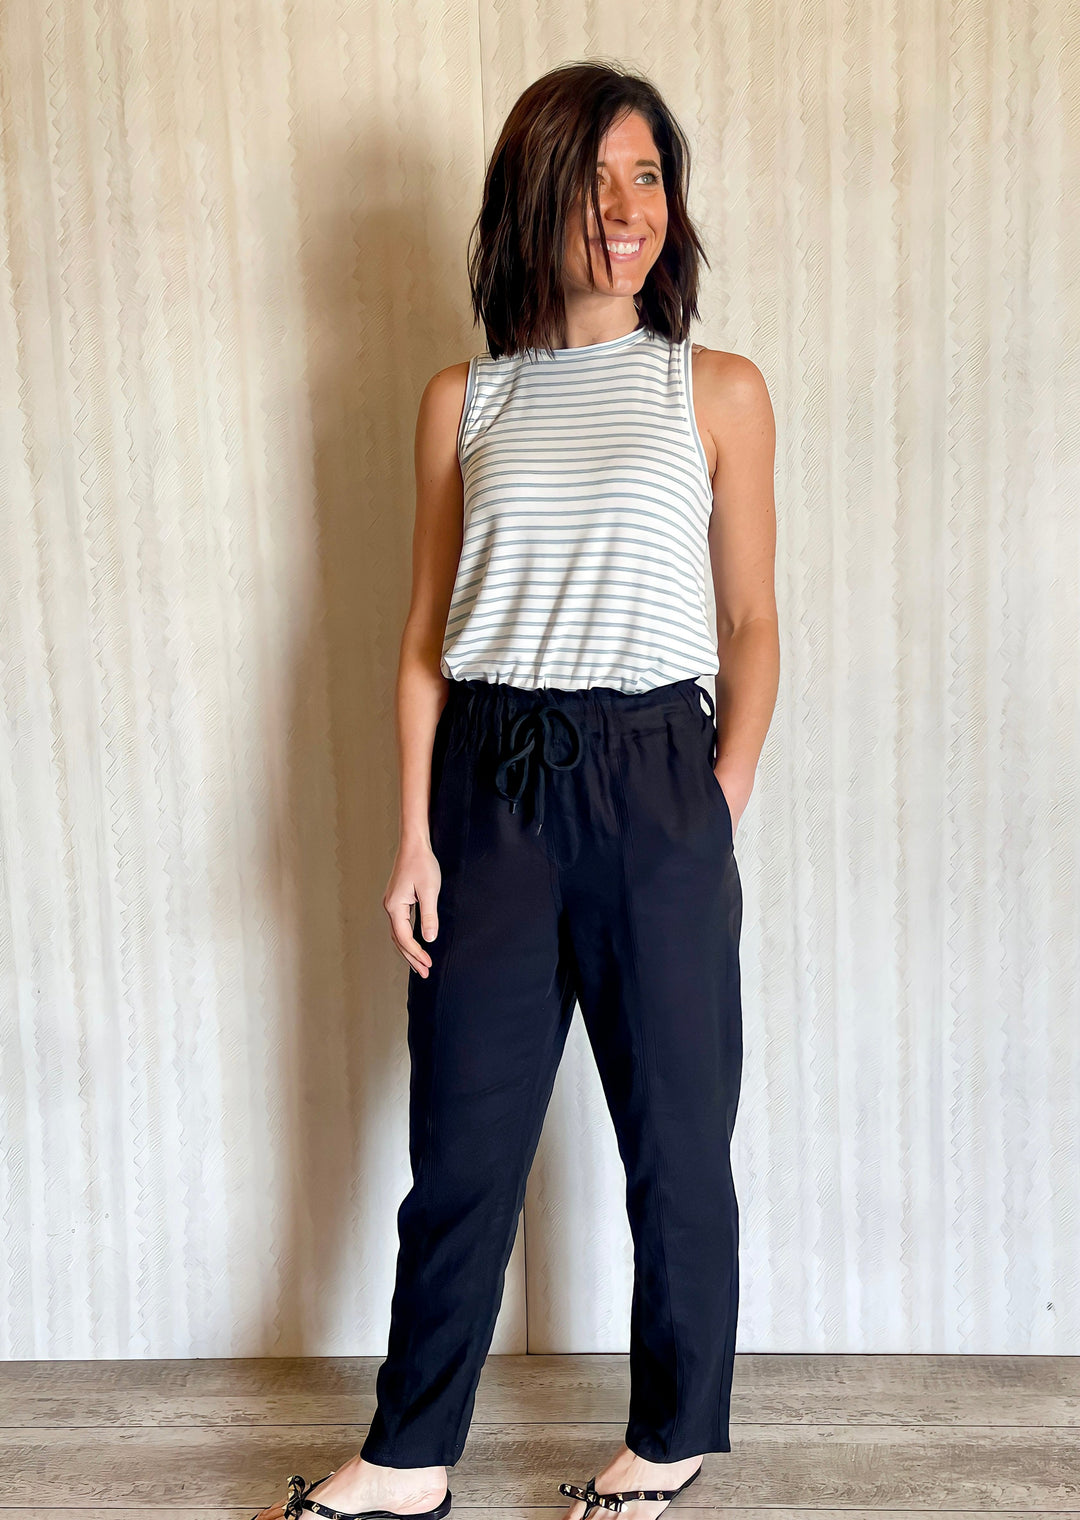 Women's Black Linen Pants with pockets, drawstring, and scrunchy waist.